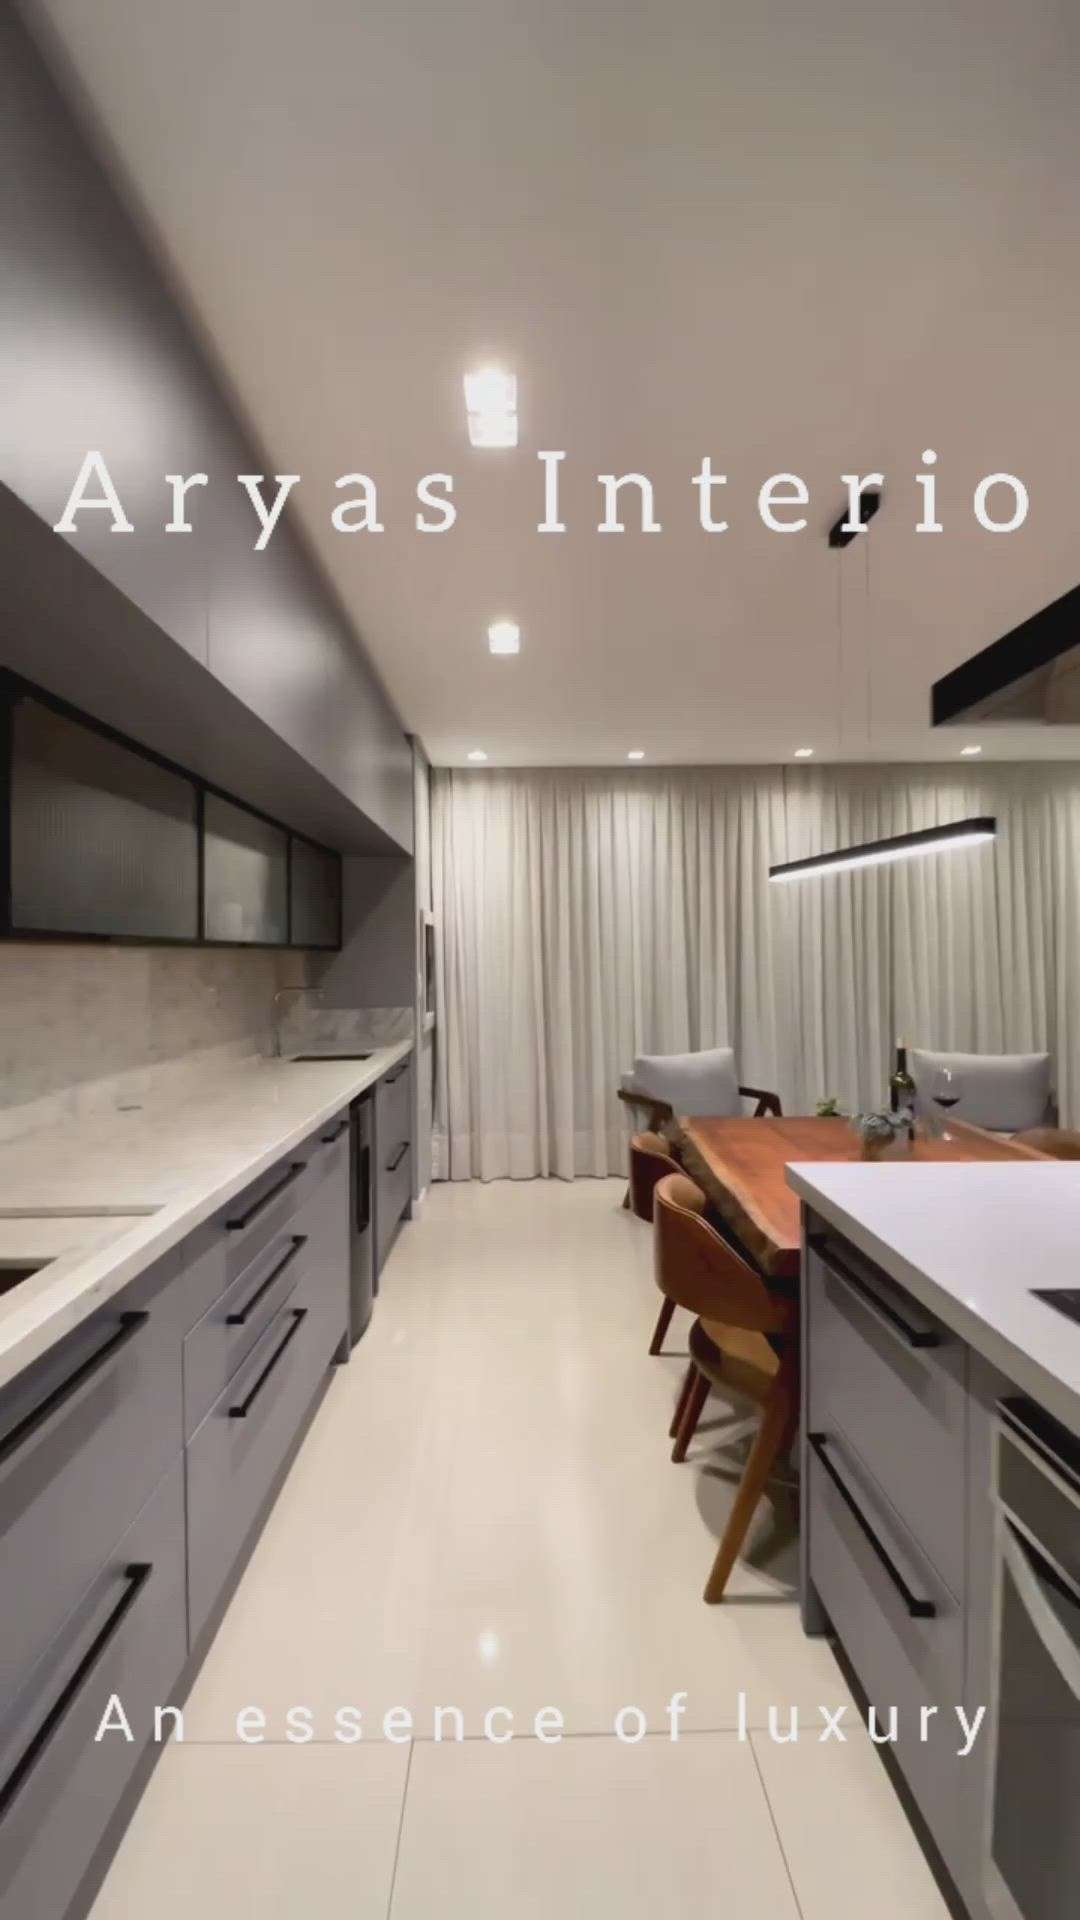 Modular kitchen design for you all by Aryas interio & Infra services,
Provide complete end to end Professional Interior, Construction &  Renovation Services in Delhi Ncr, Gurugram, Ghaziabad, Noida, Greater Noida, Faridabad, chandigarh, Manali and Shimla. Contact us right now for any interior or renovation work, call us @ +91-7018188569 &
Visit our website at www.designinterios.com
Follow us on Instagram #aryasinterio and Facebook @aryasinterio .
#uttarpradesh #construction_himachal
#noidainterior #noida #DelhiGhaziabadNoida #noidaconstruction #interiordesign #InteriorDesigner  #interiors #interiordesigner #interiordecor #interiorstyling #delhiinteriors #greaternoida #interior_designer_in_faridabad #ghaziabadinterior #ghaziabad  #chandigarh